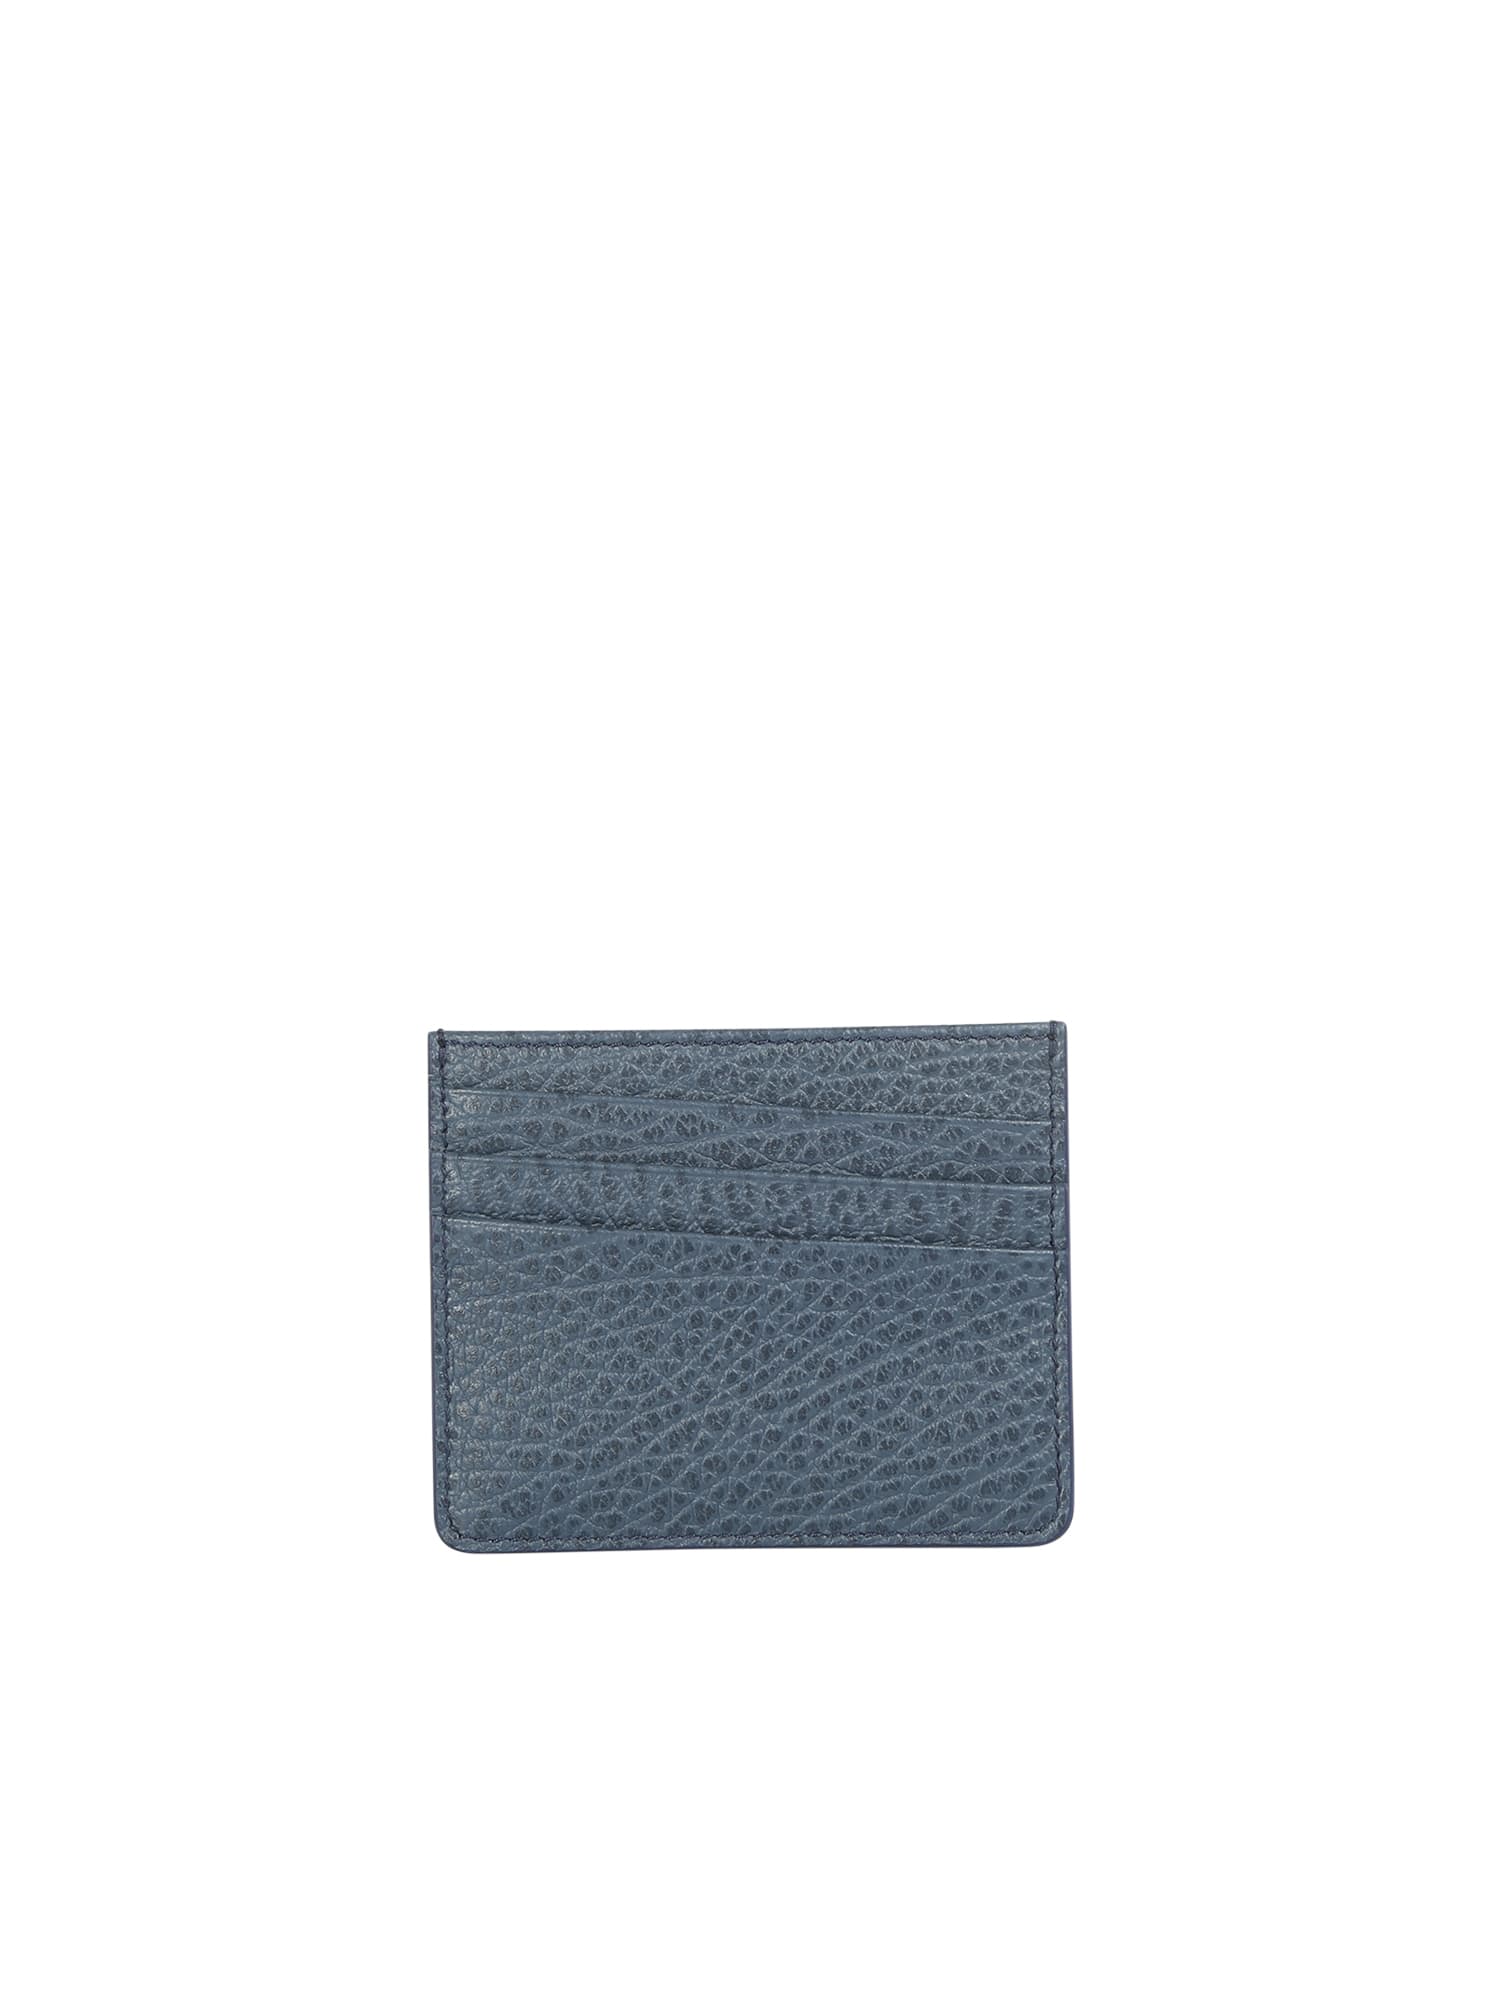 Maison Margiela Card Holder In Gained Leather With The Maisons Iconic